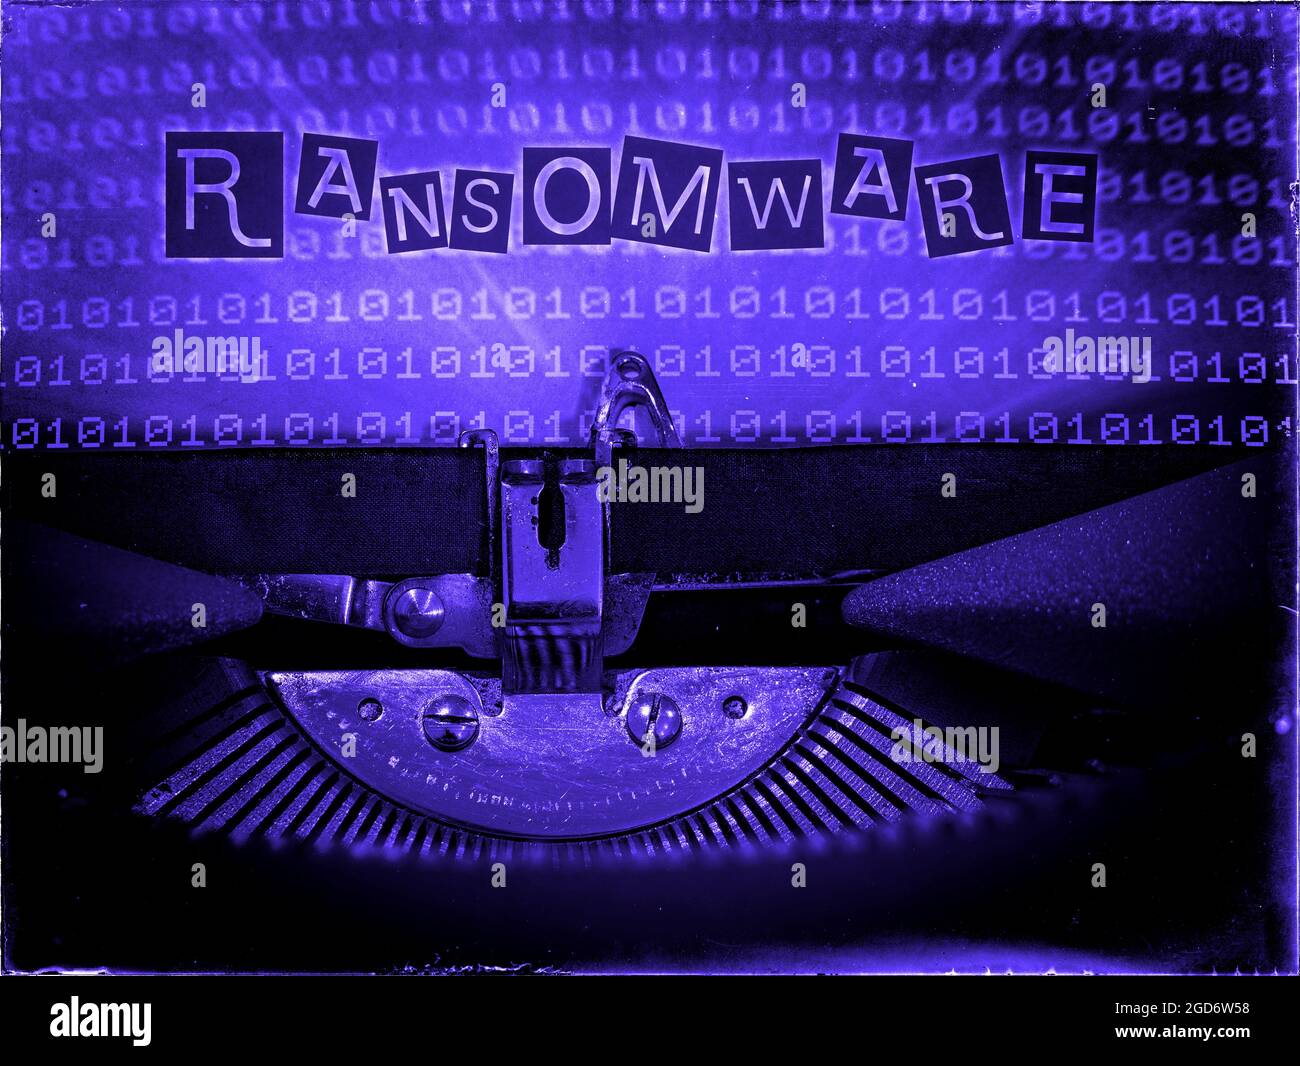 Ransomware, Mechanical Typewriter, Binary code background, Blue tone, Vintage distorted look, Ransom note typography Stock Photo